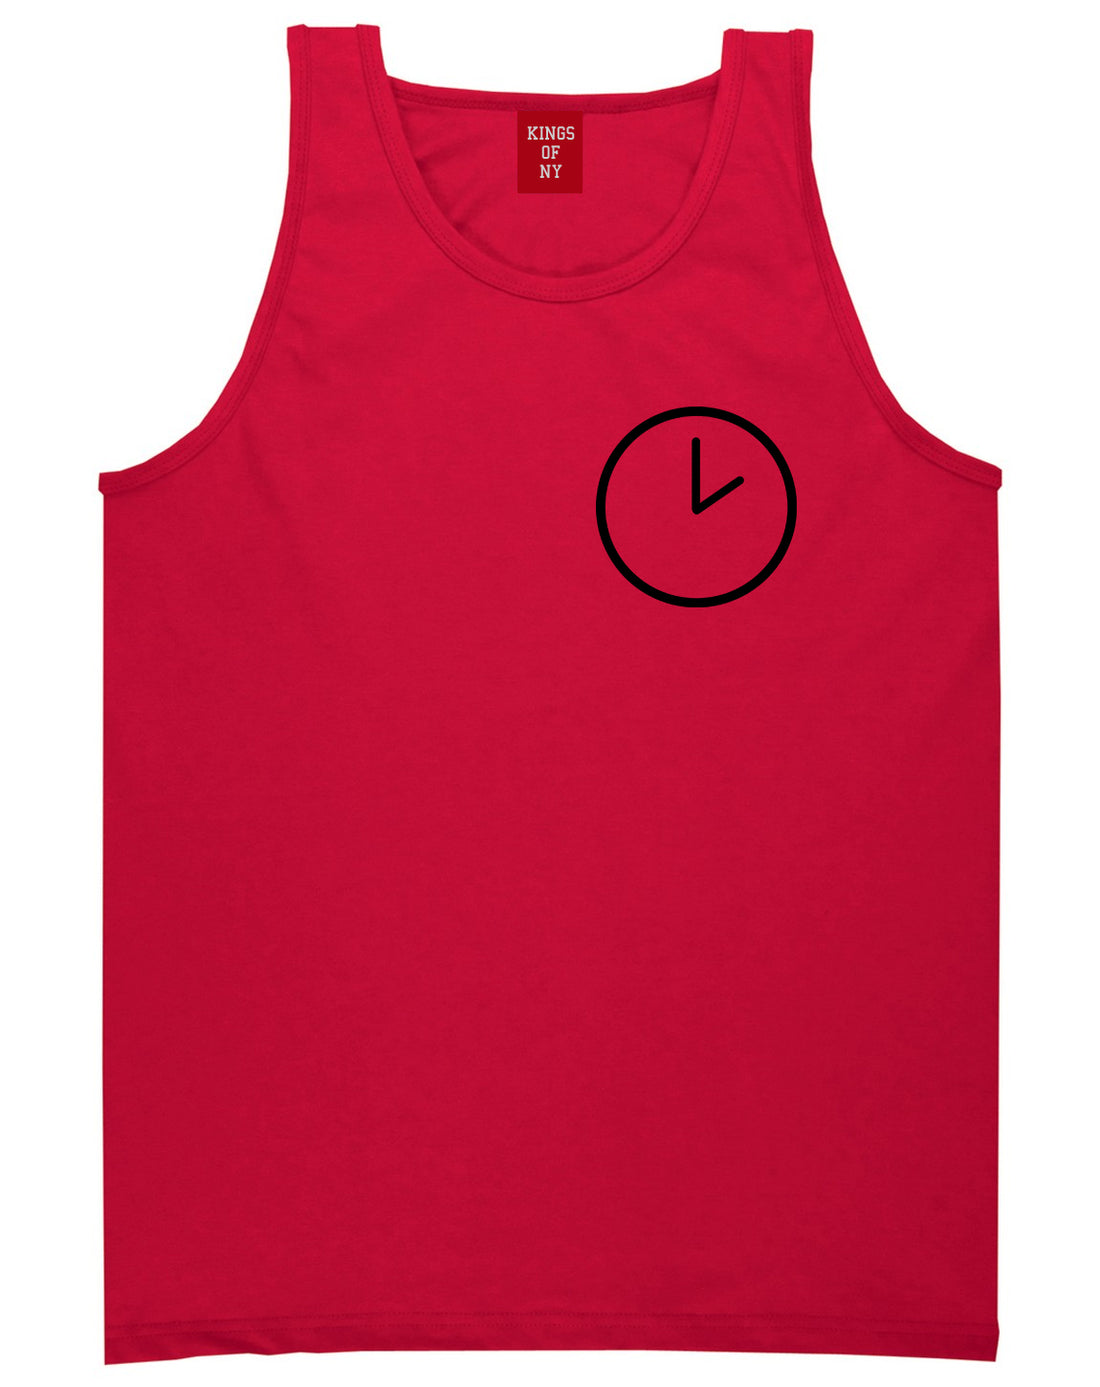 Clock Chest Red Tank Top Shirt by Kings Of NY